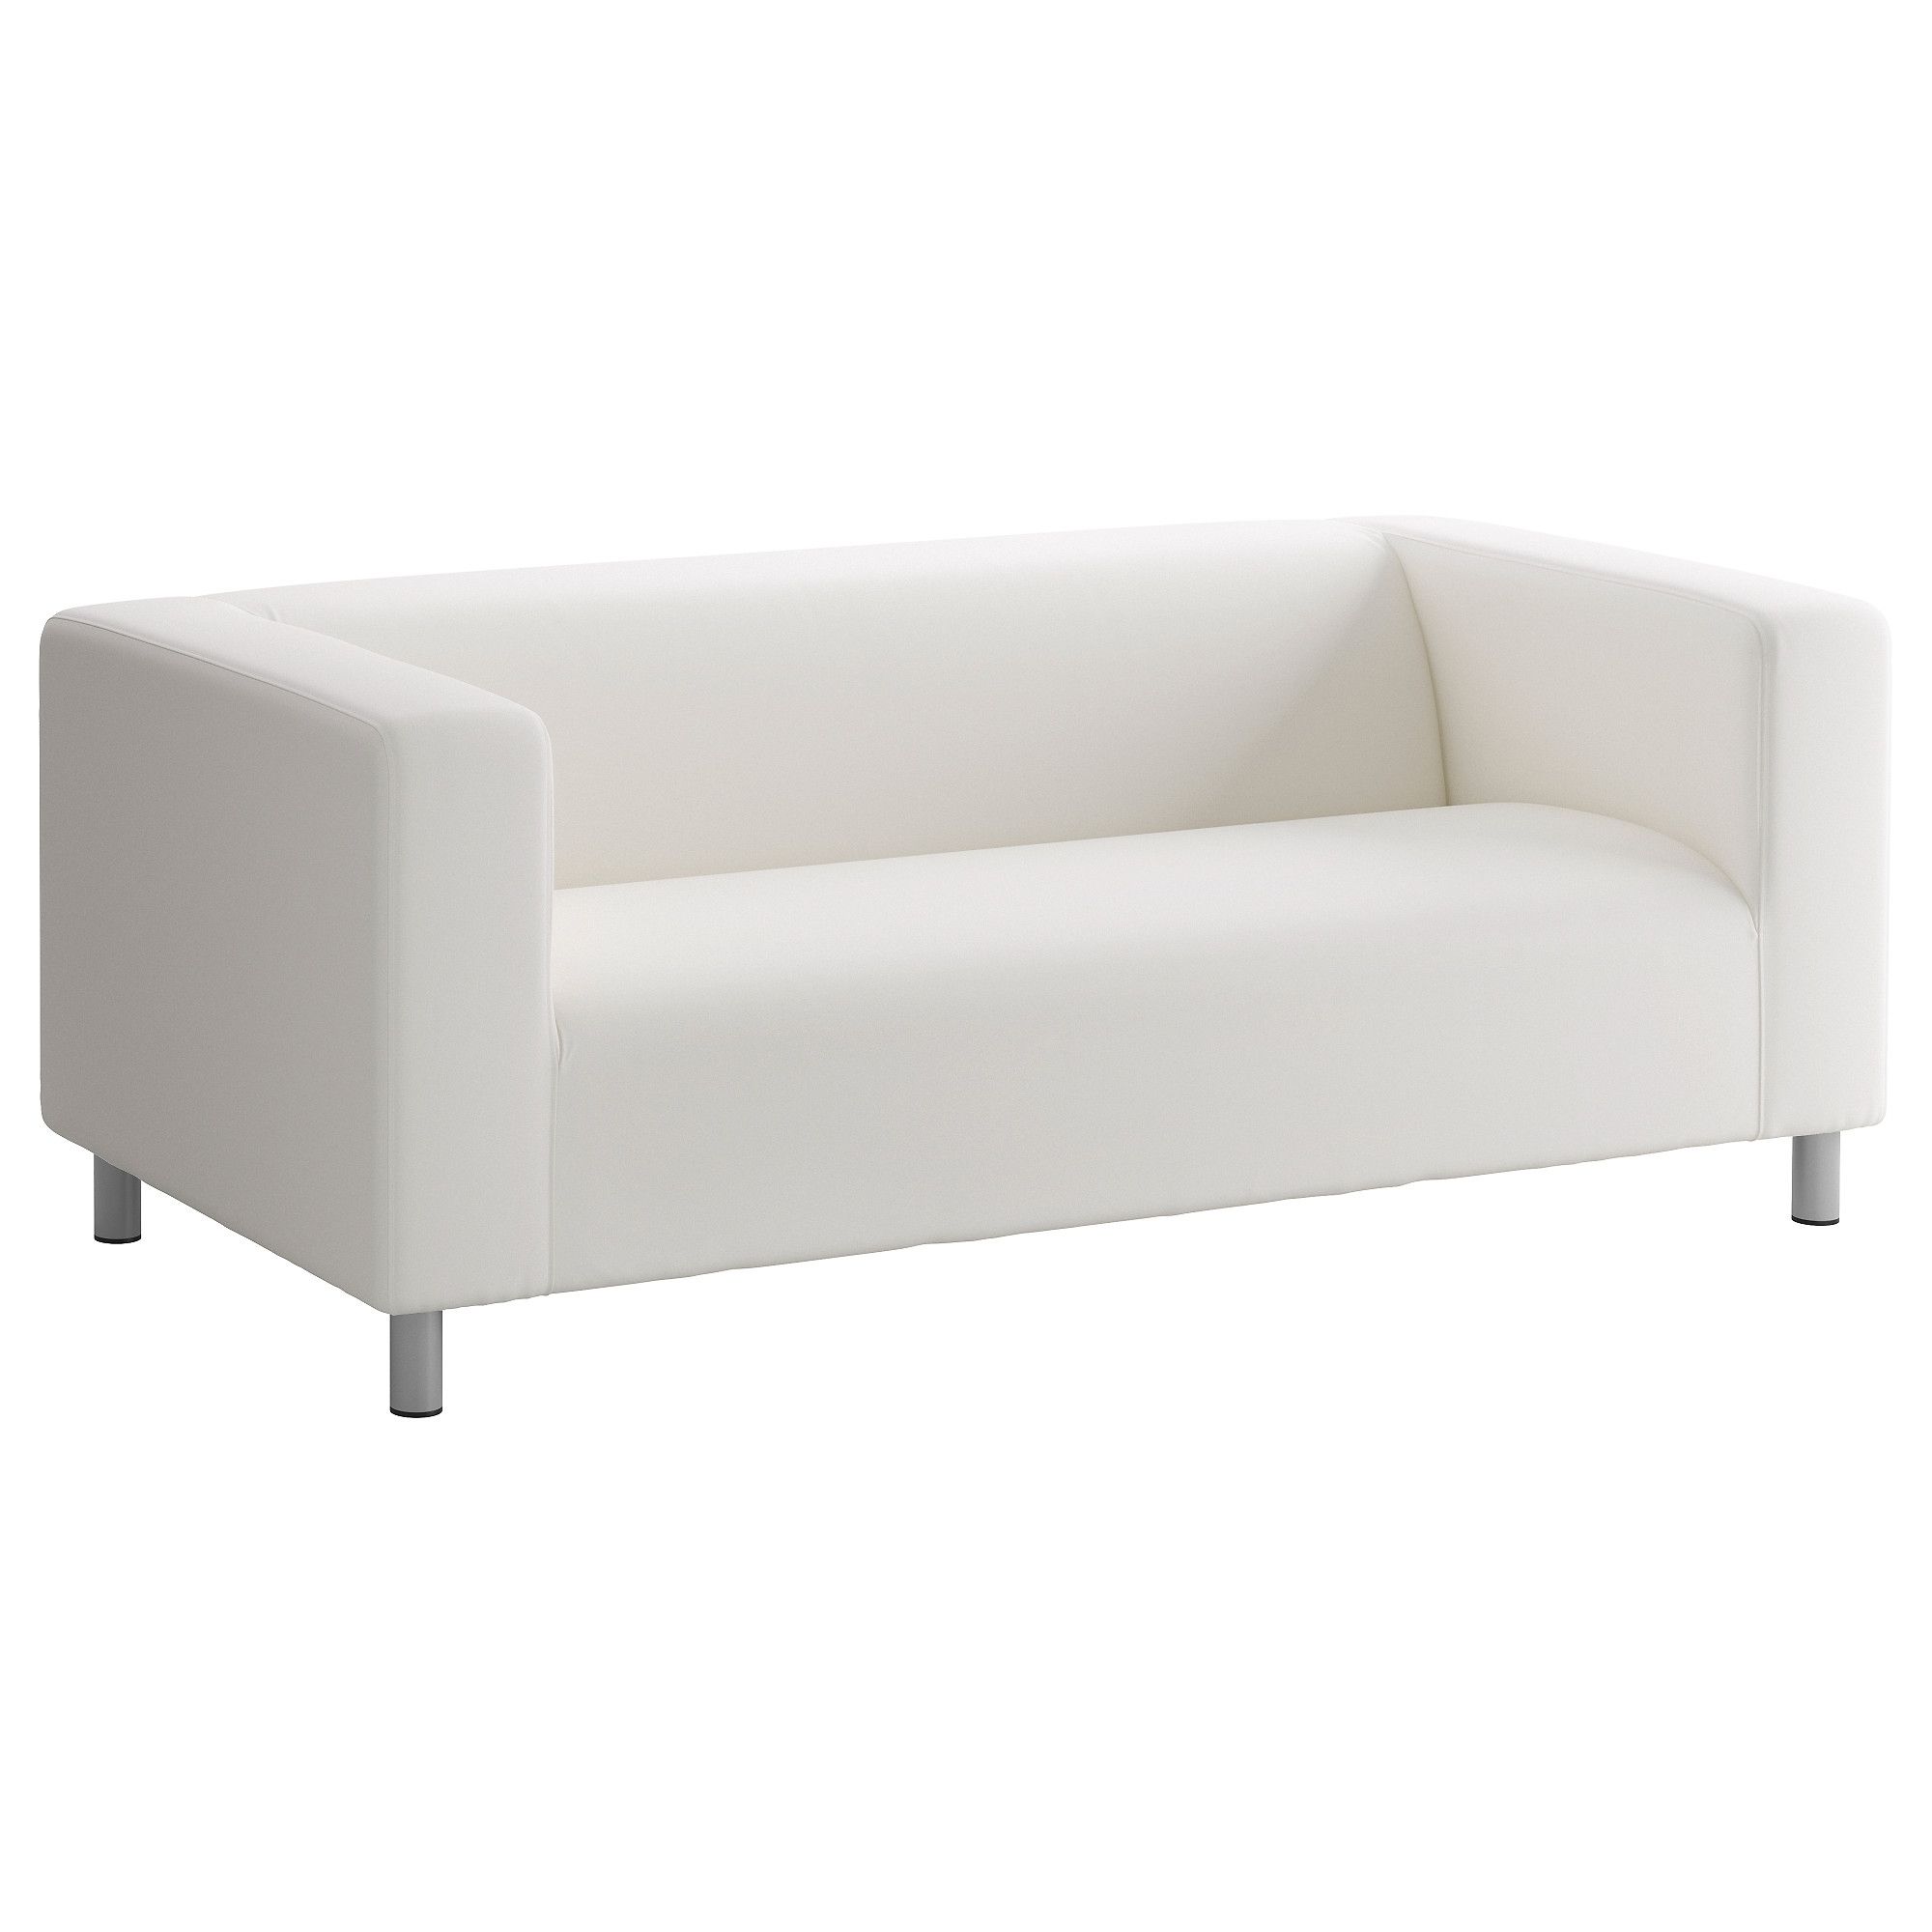 Ikea Two Seater Sofas With Most Recently Released Klippan Two Seat Sofa Ransta White – Ikea (View 5 of 15)